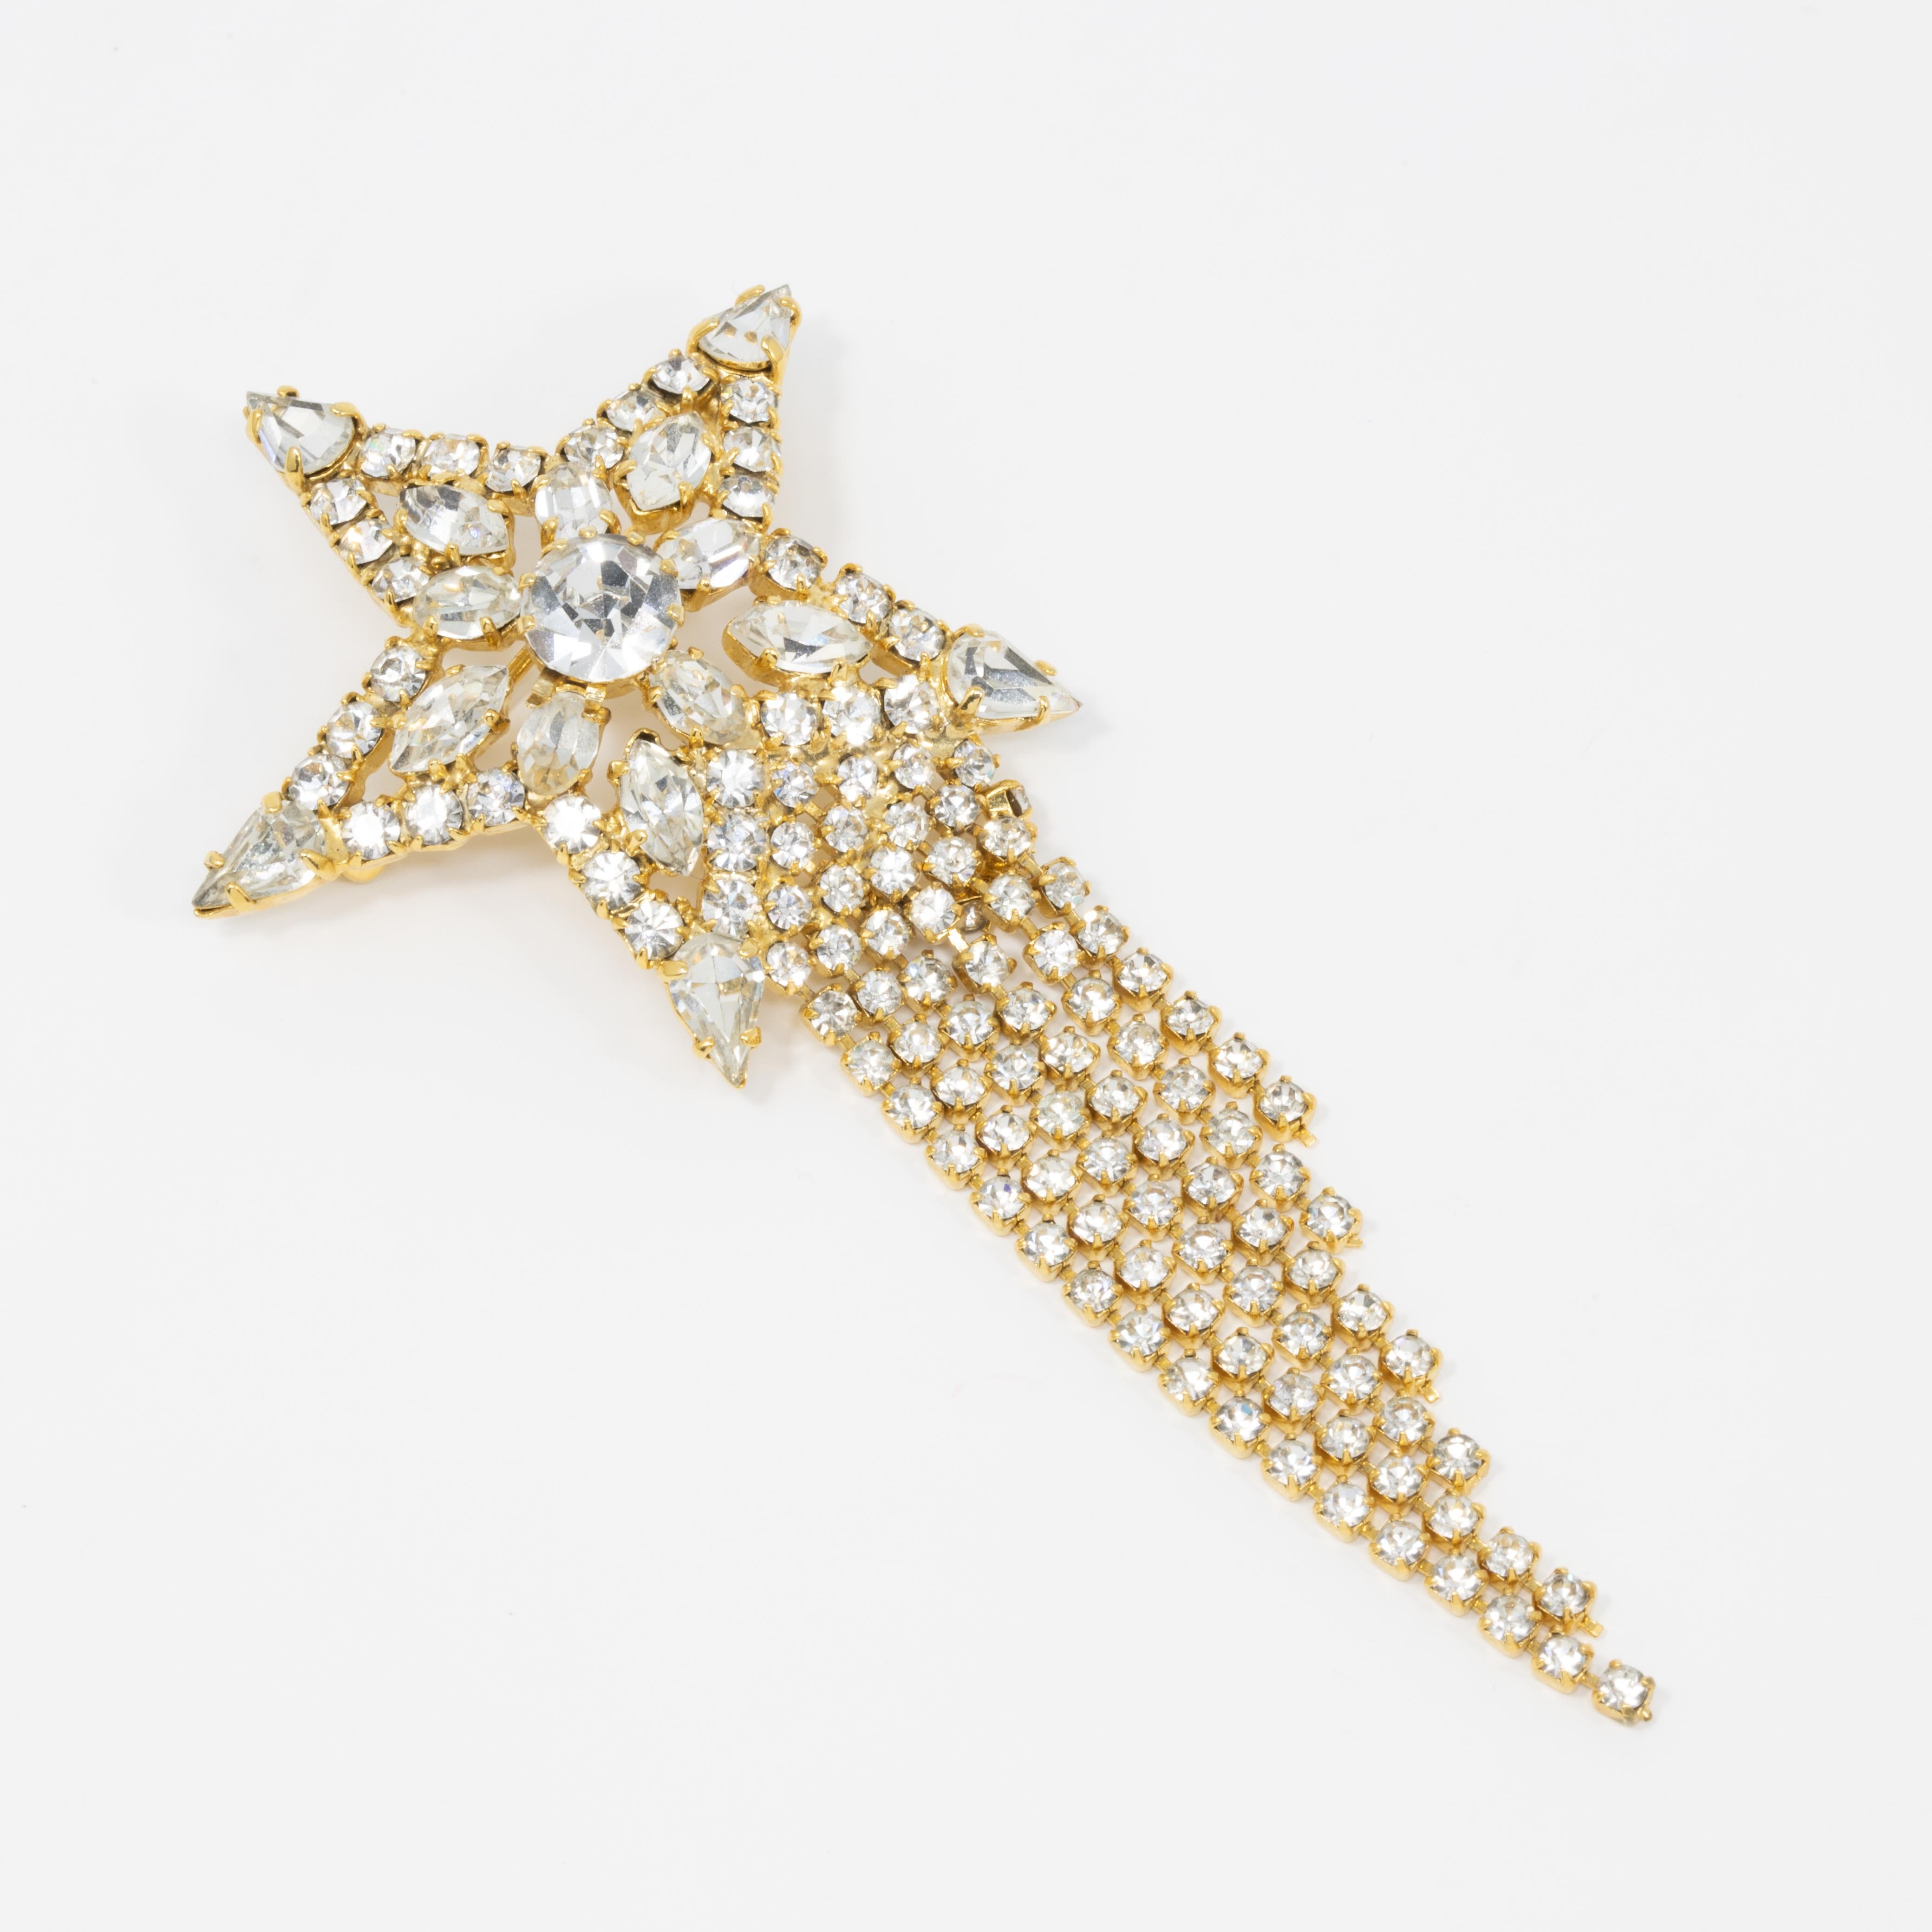 Vintage pin from mid to late 1900s, from UK-based costume jewelry designer Butler and Wilson. A sparkling, crystal-encrusted shooting star, accented with cascading tassels that add dazzling movement to the piece!

Hallmarks: B&W